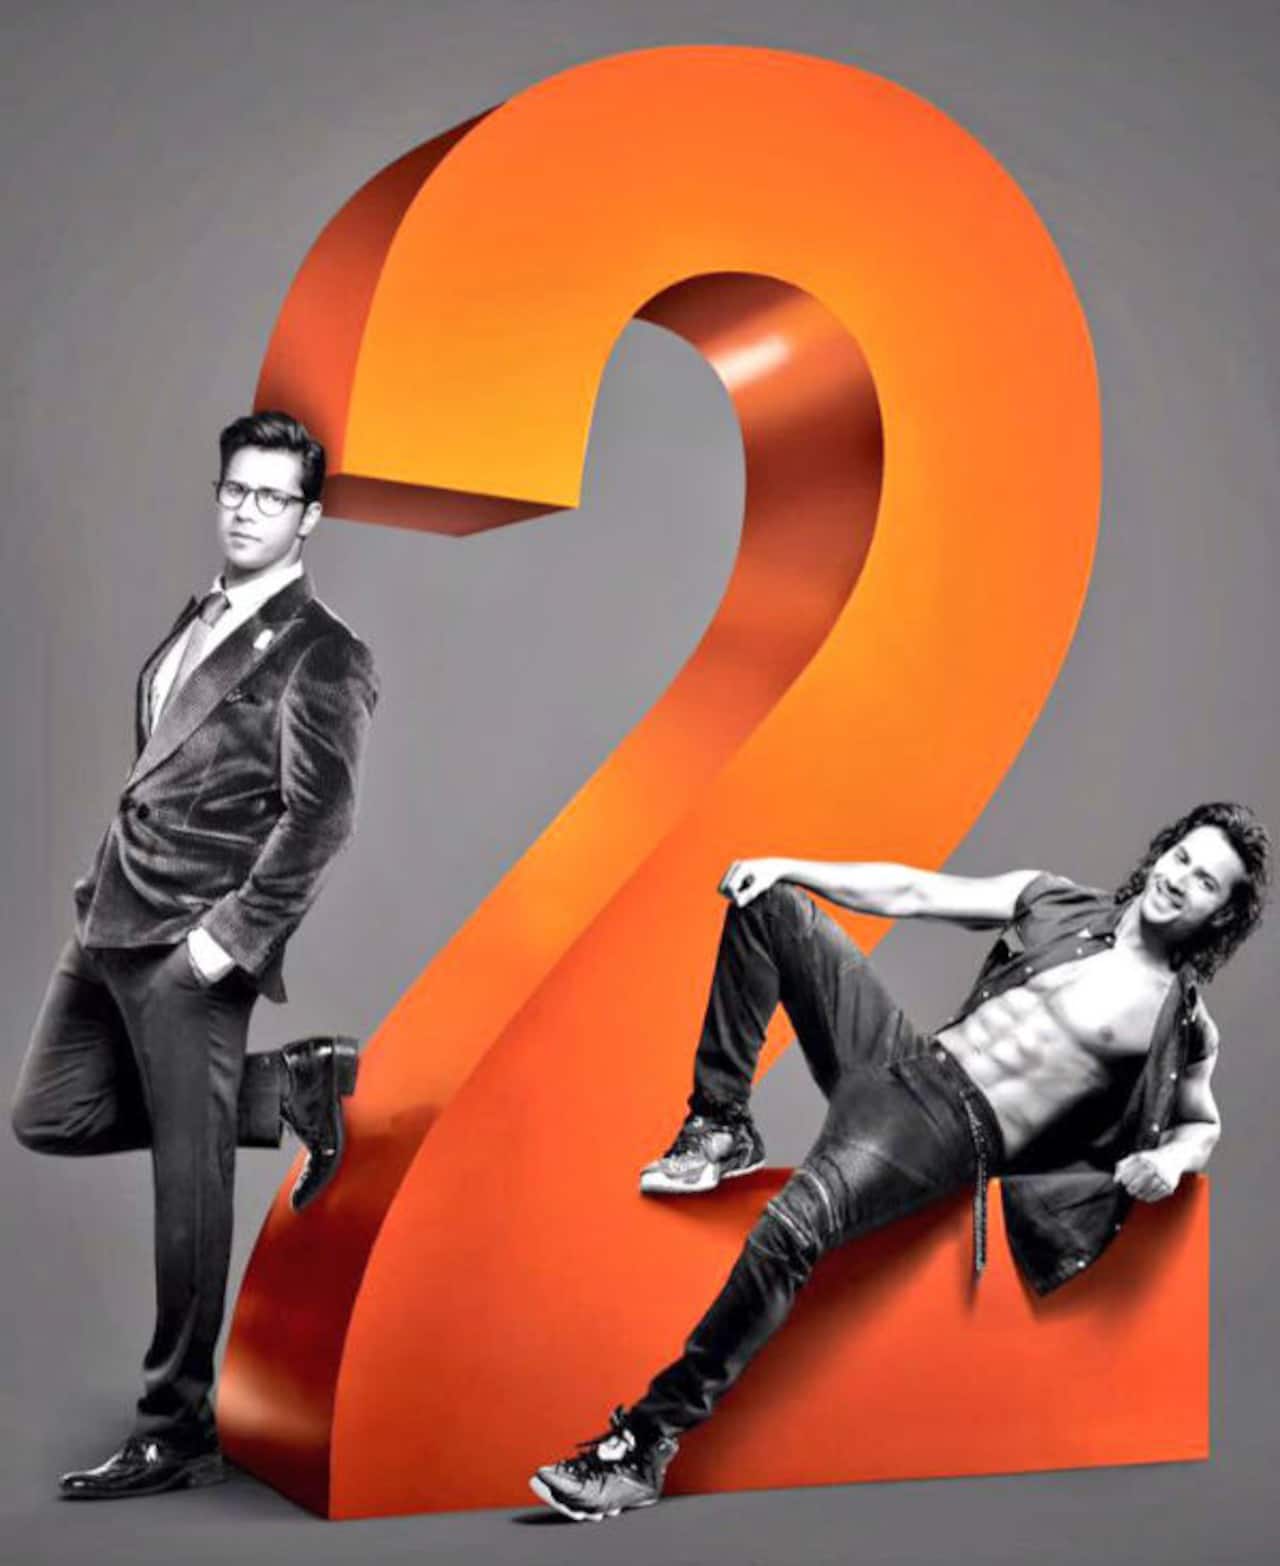 MARK THIS DATE! Varun Dhawan's Judwaa 2 trailer to be unveiled on August 21